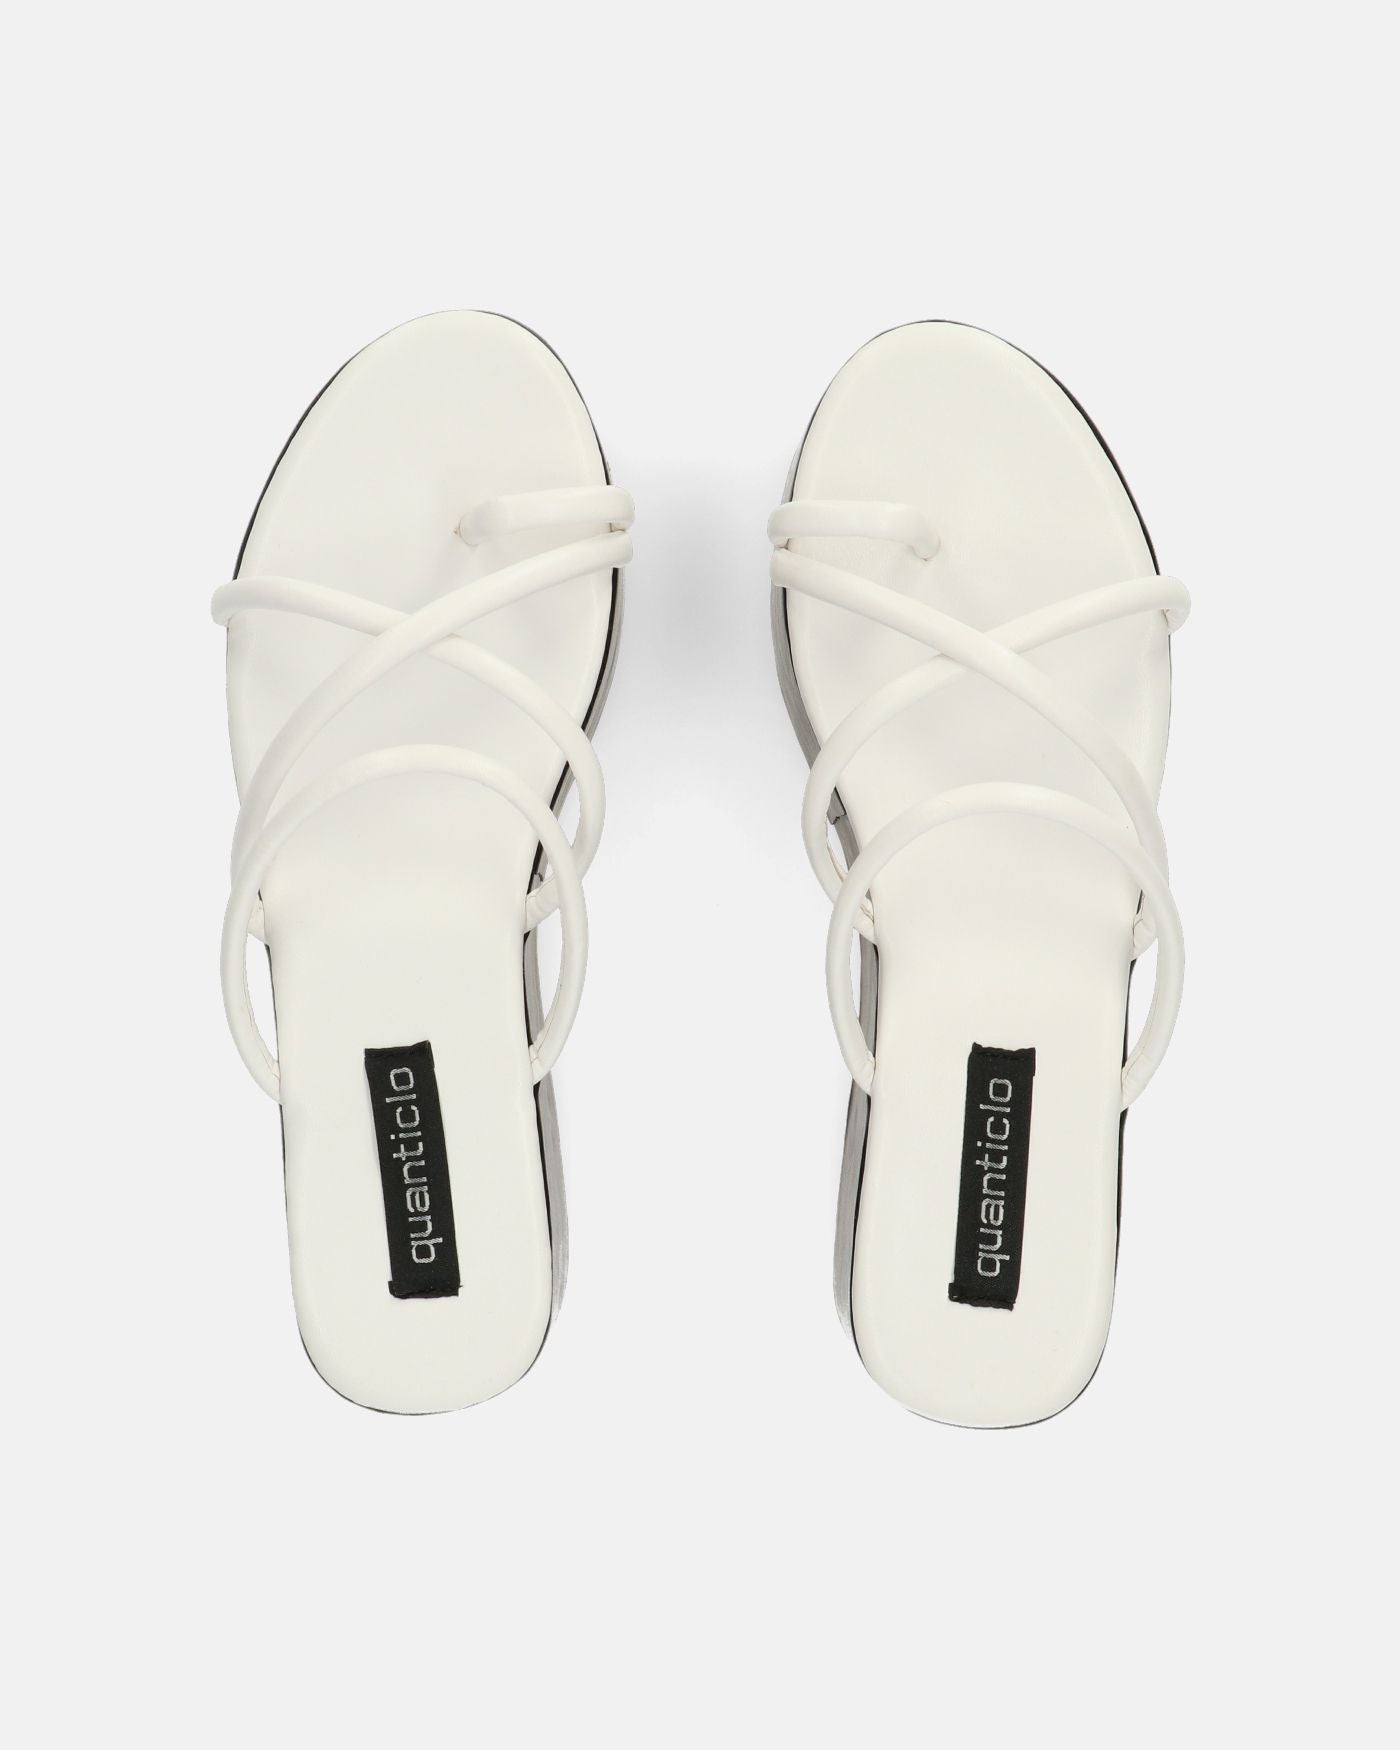 NASTACIA - white wedges with faux leather loops